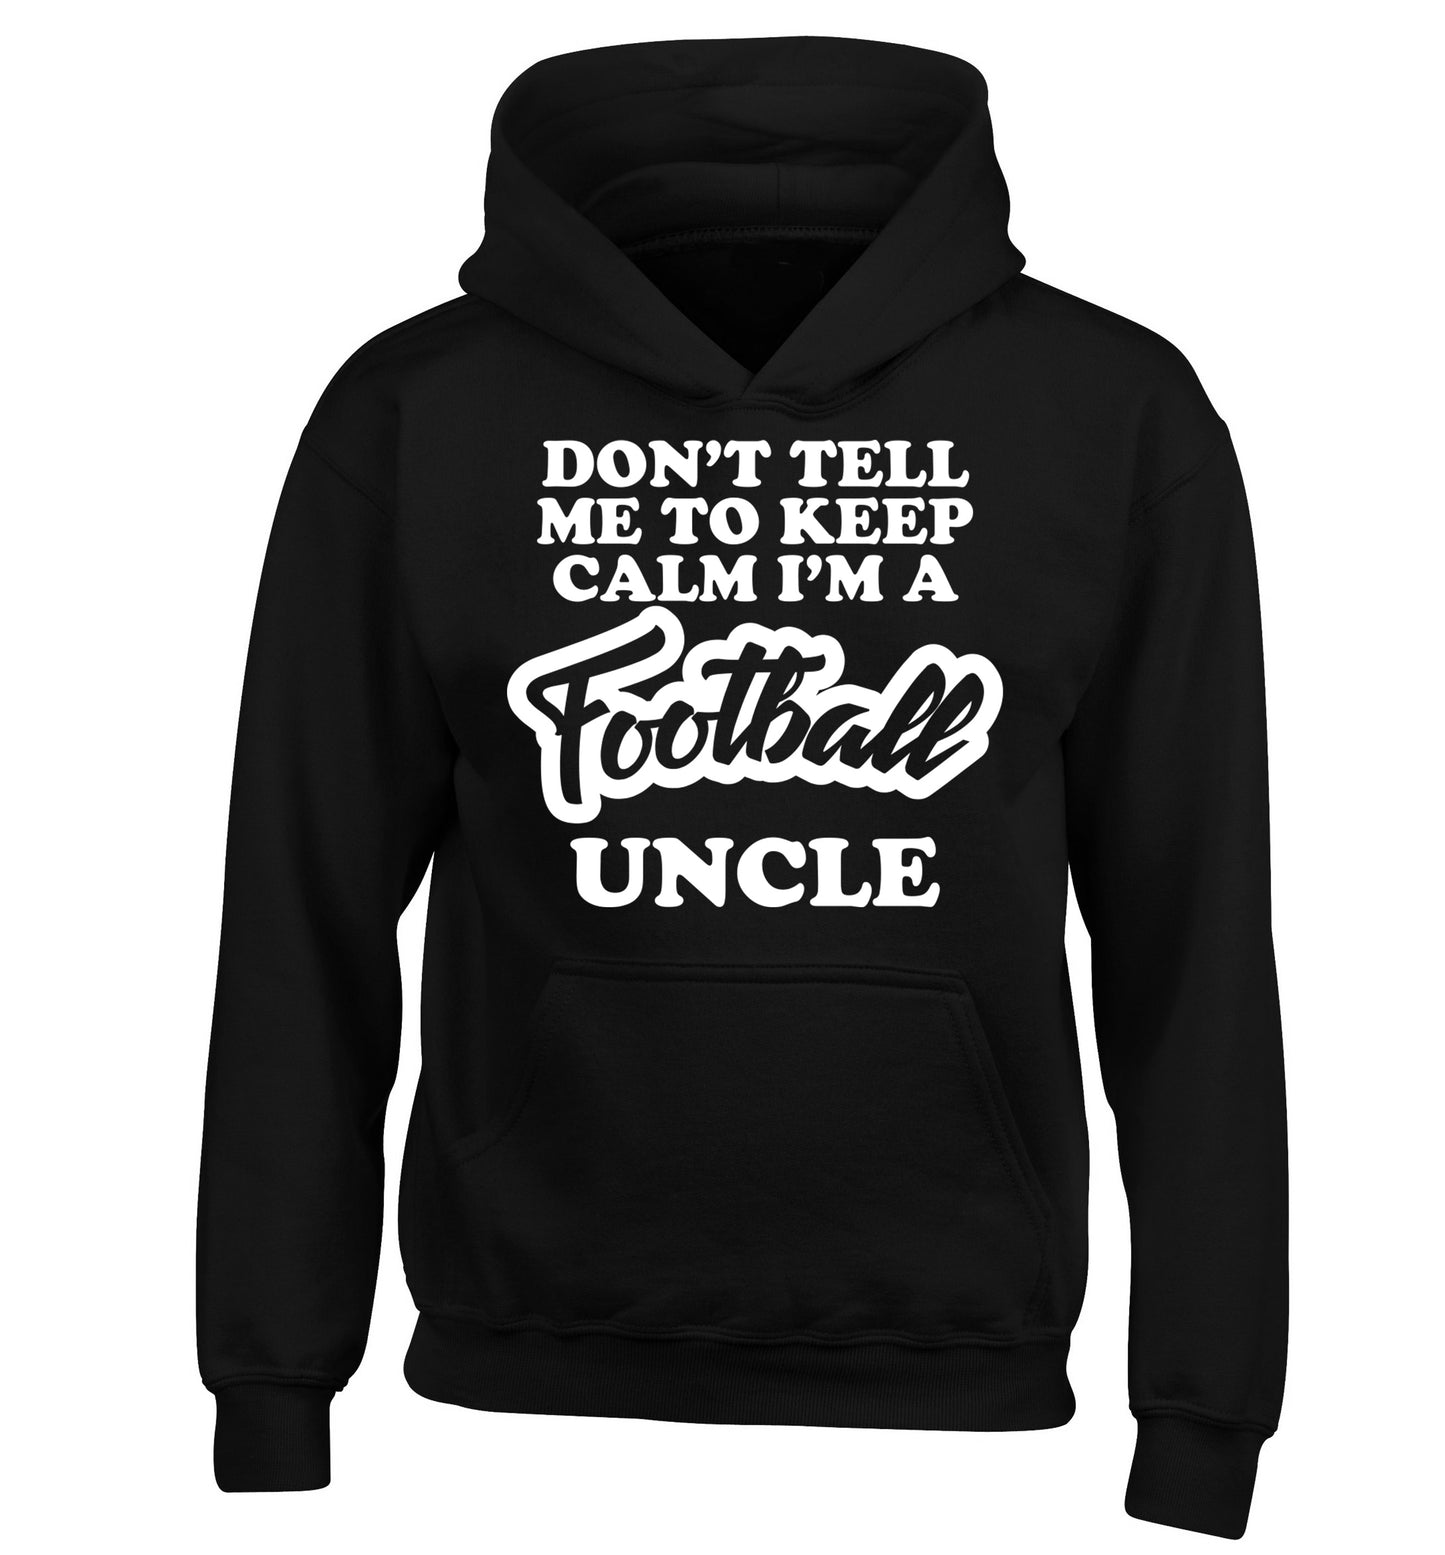 Don't tell me to keep calm I'm a football uncle children's black hoodie 12-14 Years